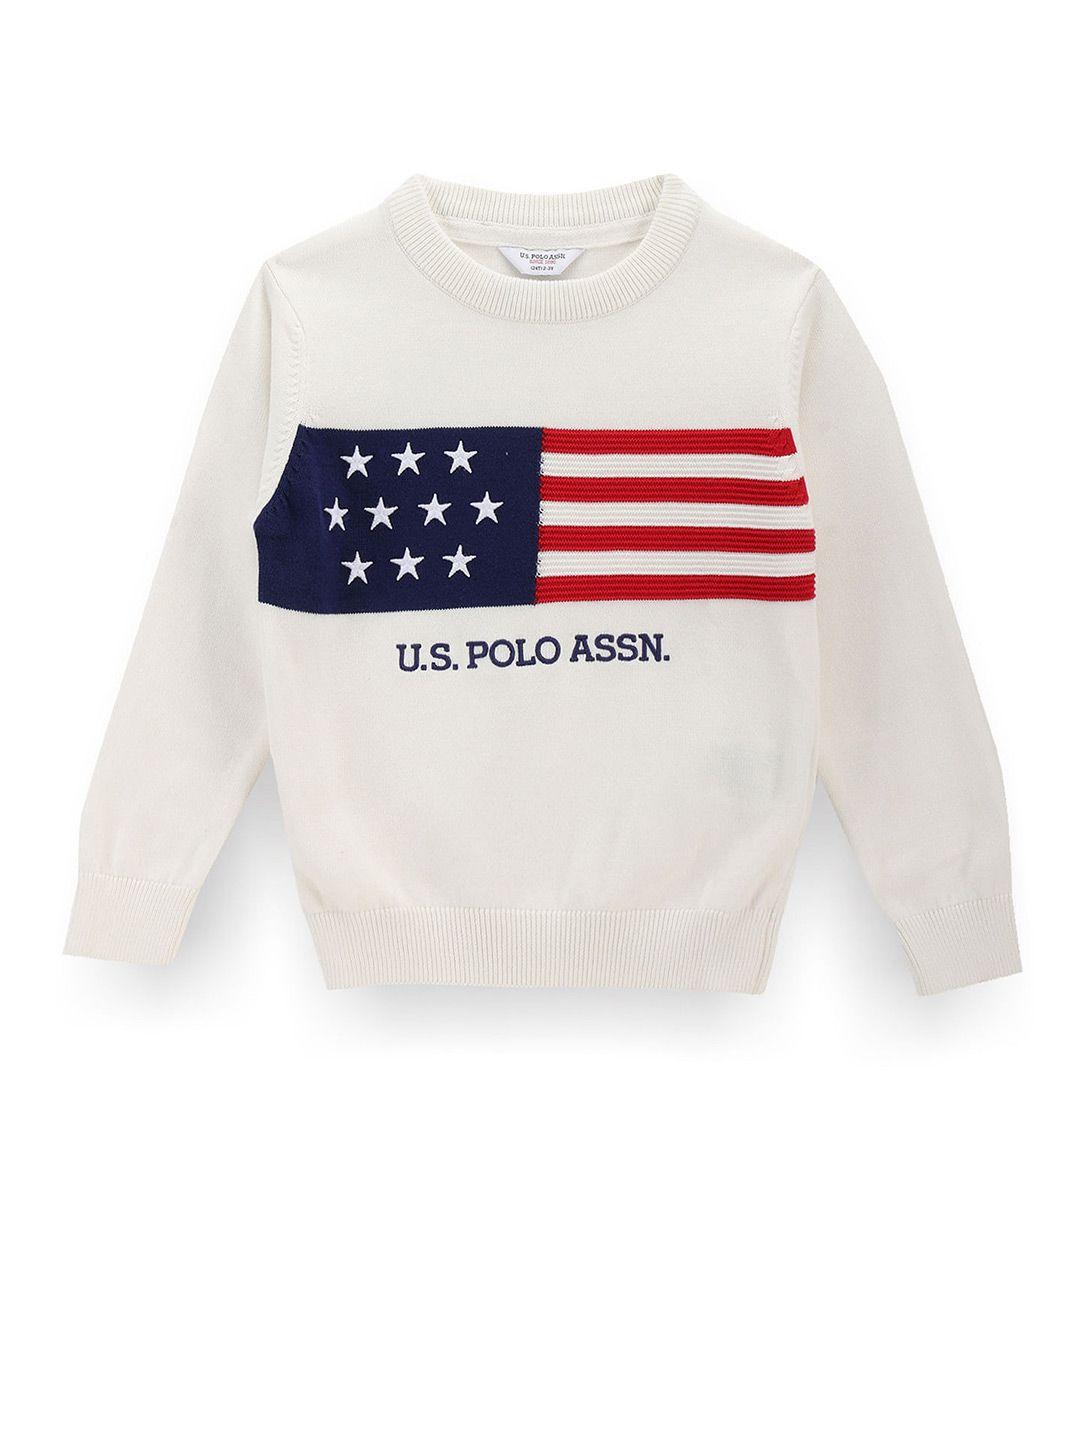 u.s. polo assn. kids boys graphic printed pure cotton pullover